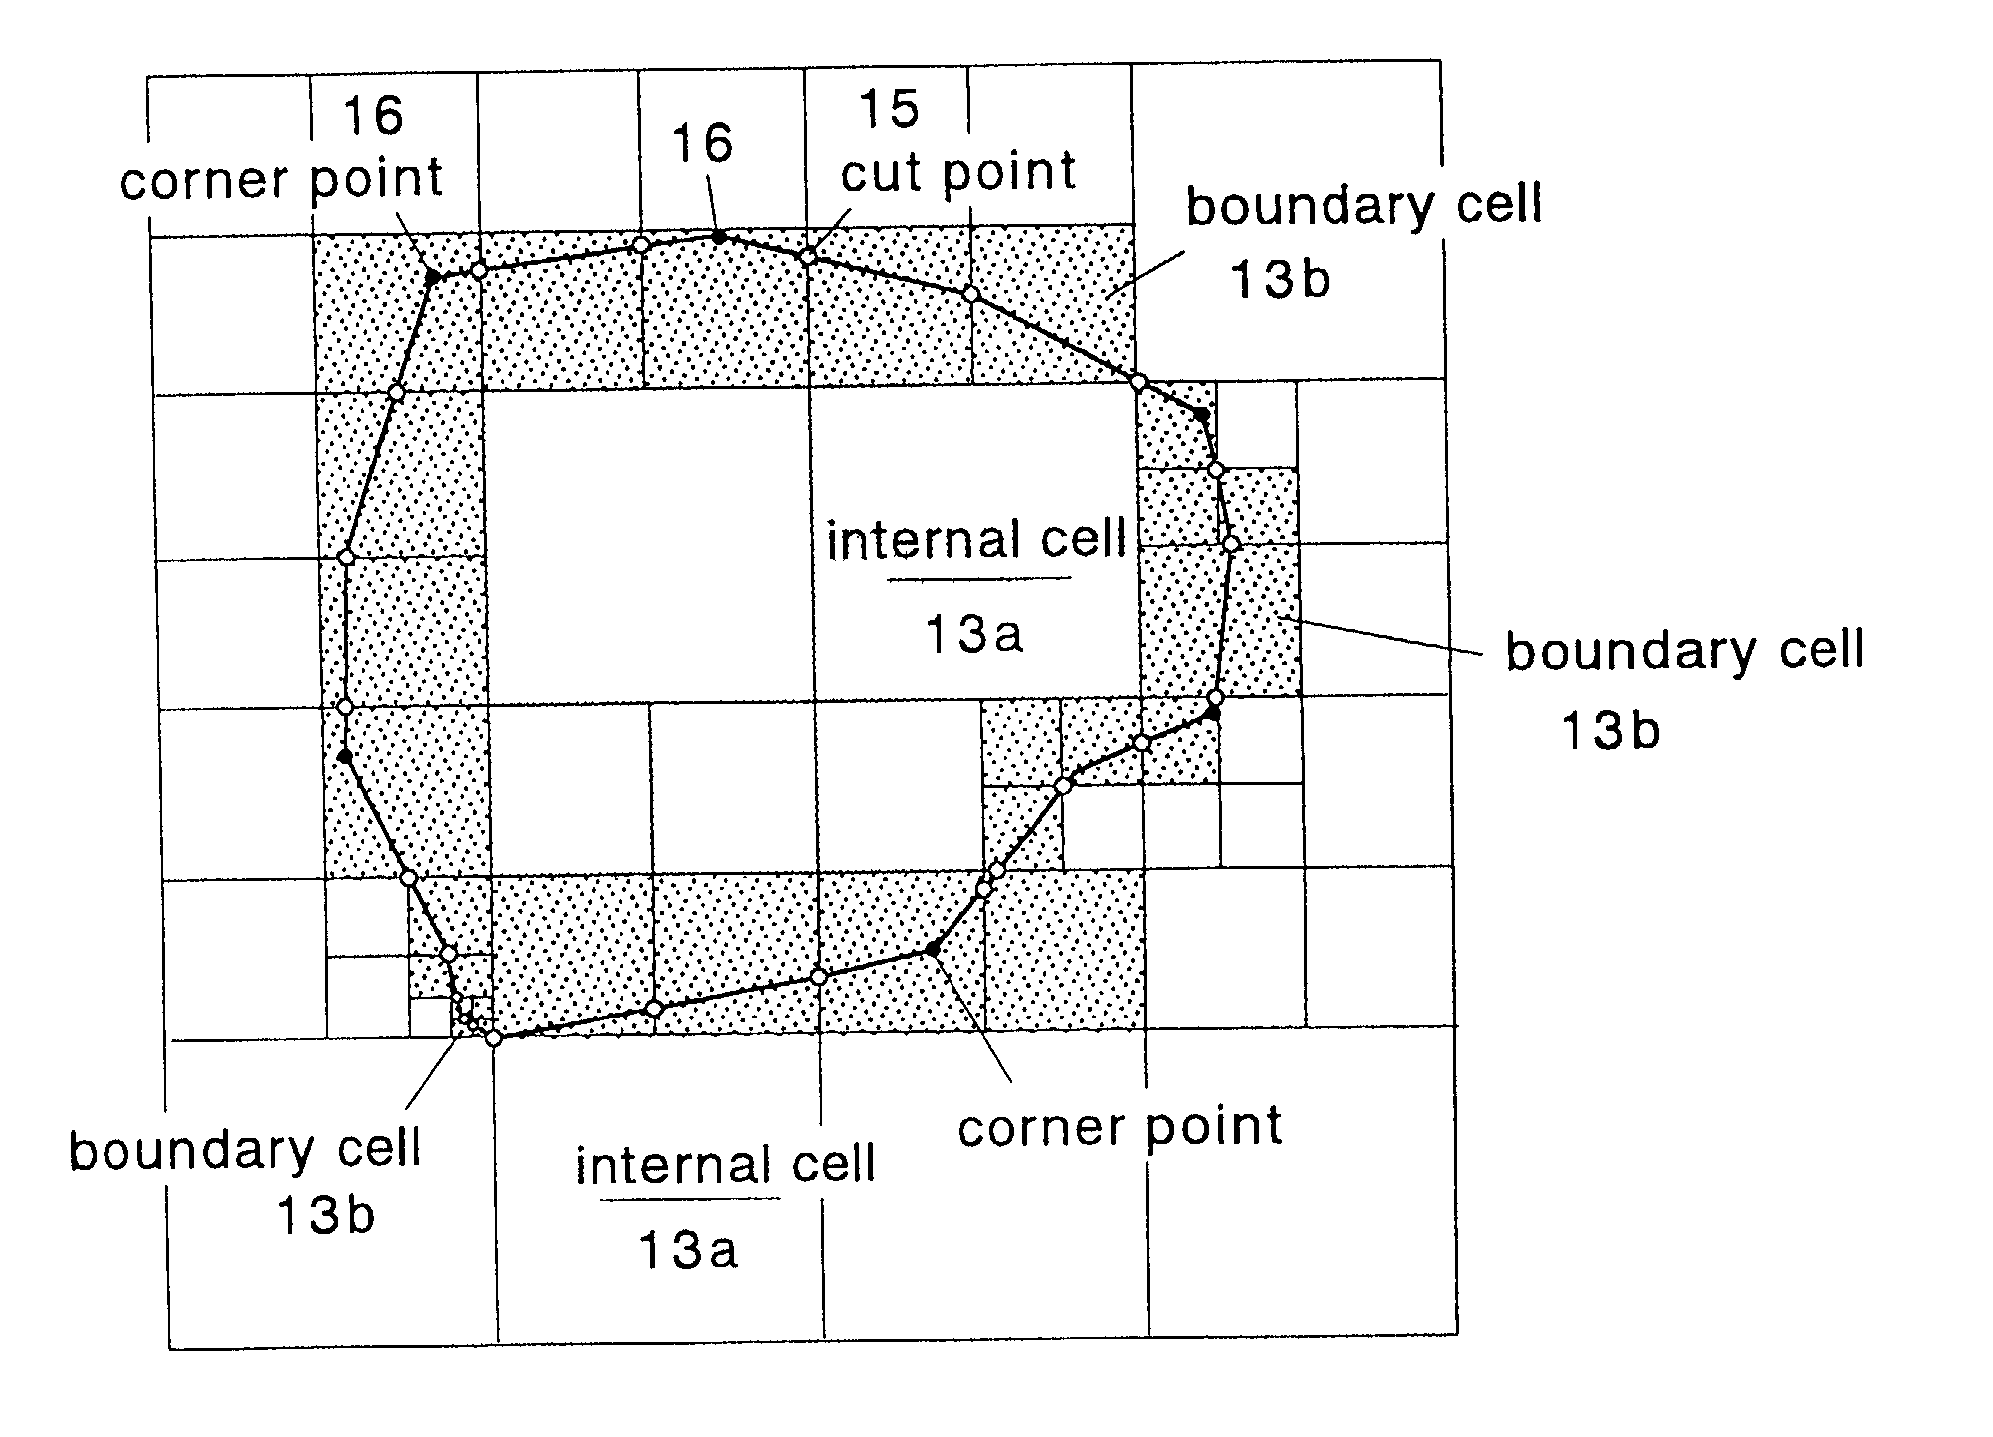 Storage method of substantial data integrating shape and physical properties